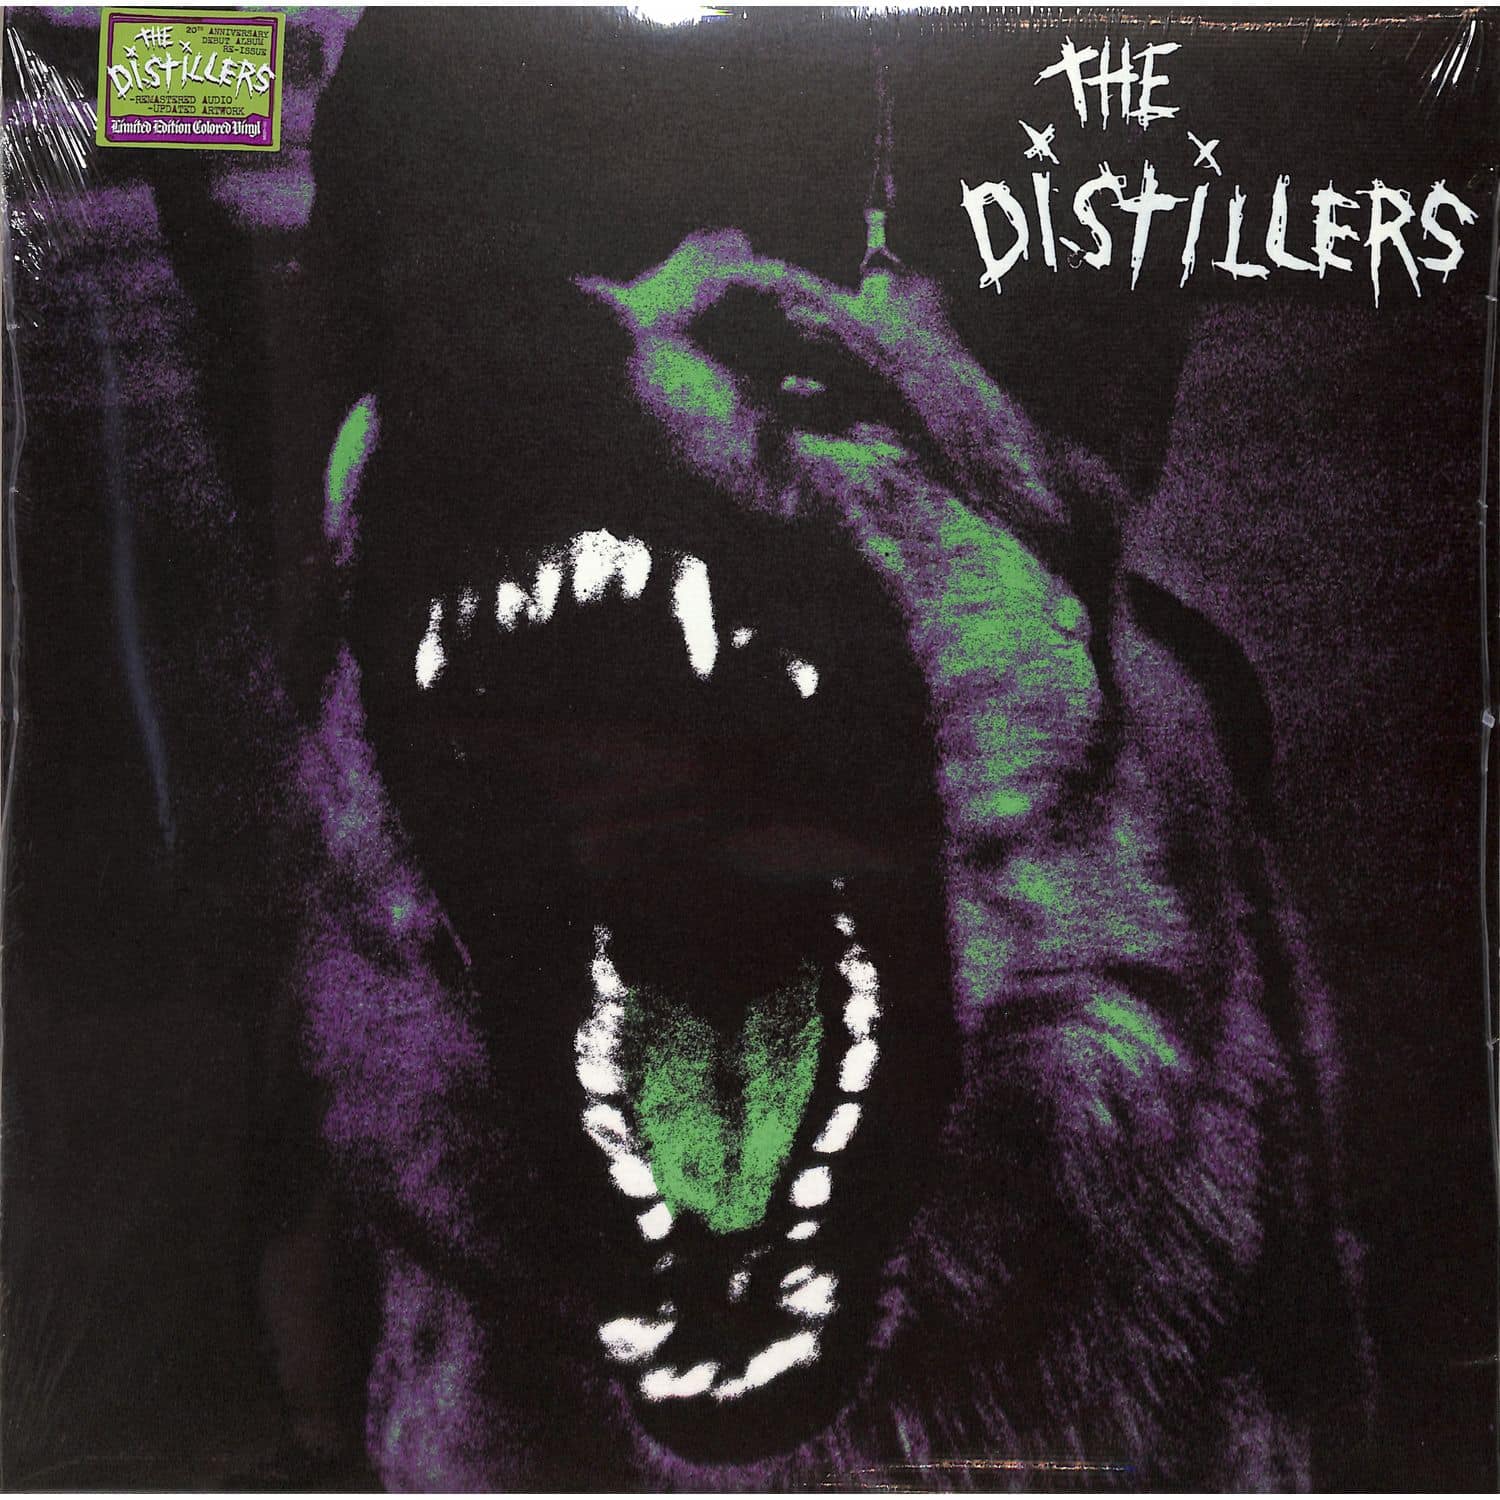 The Distillers - THE DISTILLERS 